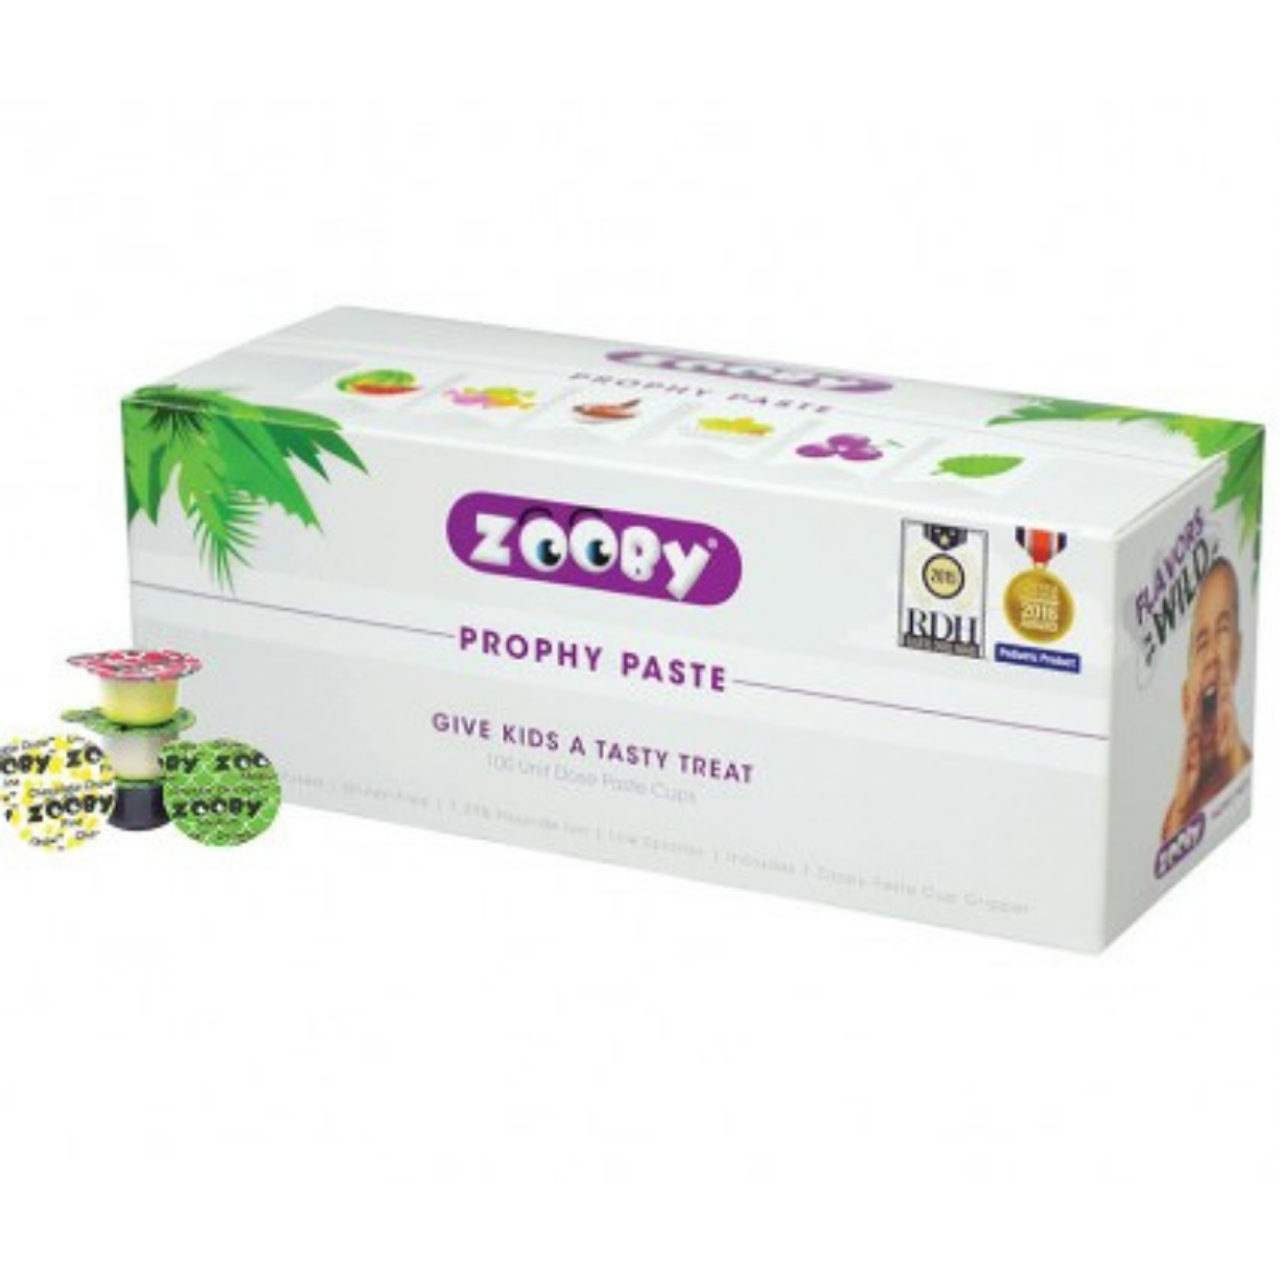 Zooby Assorted Prophy Paste - Animal Pack Fine Grit (100 Ct), Young Innovations, 600210